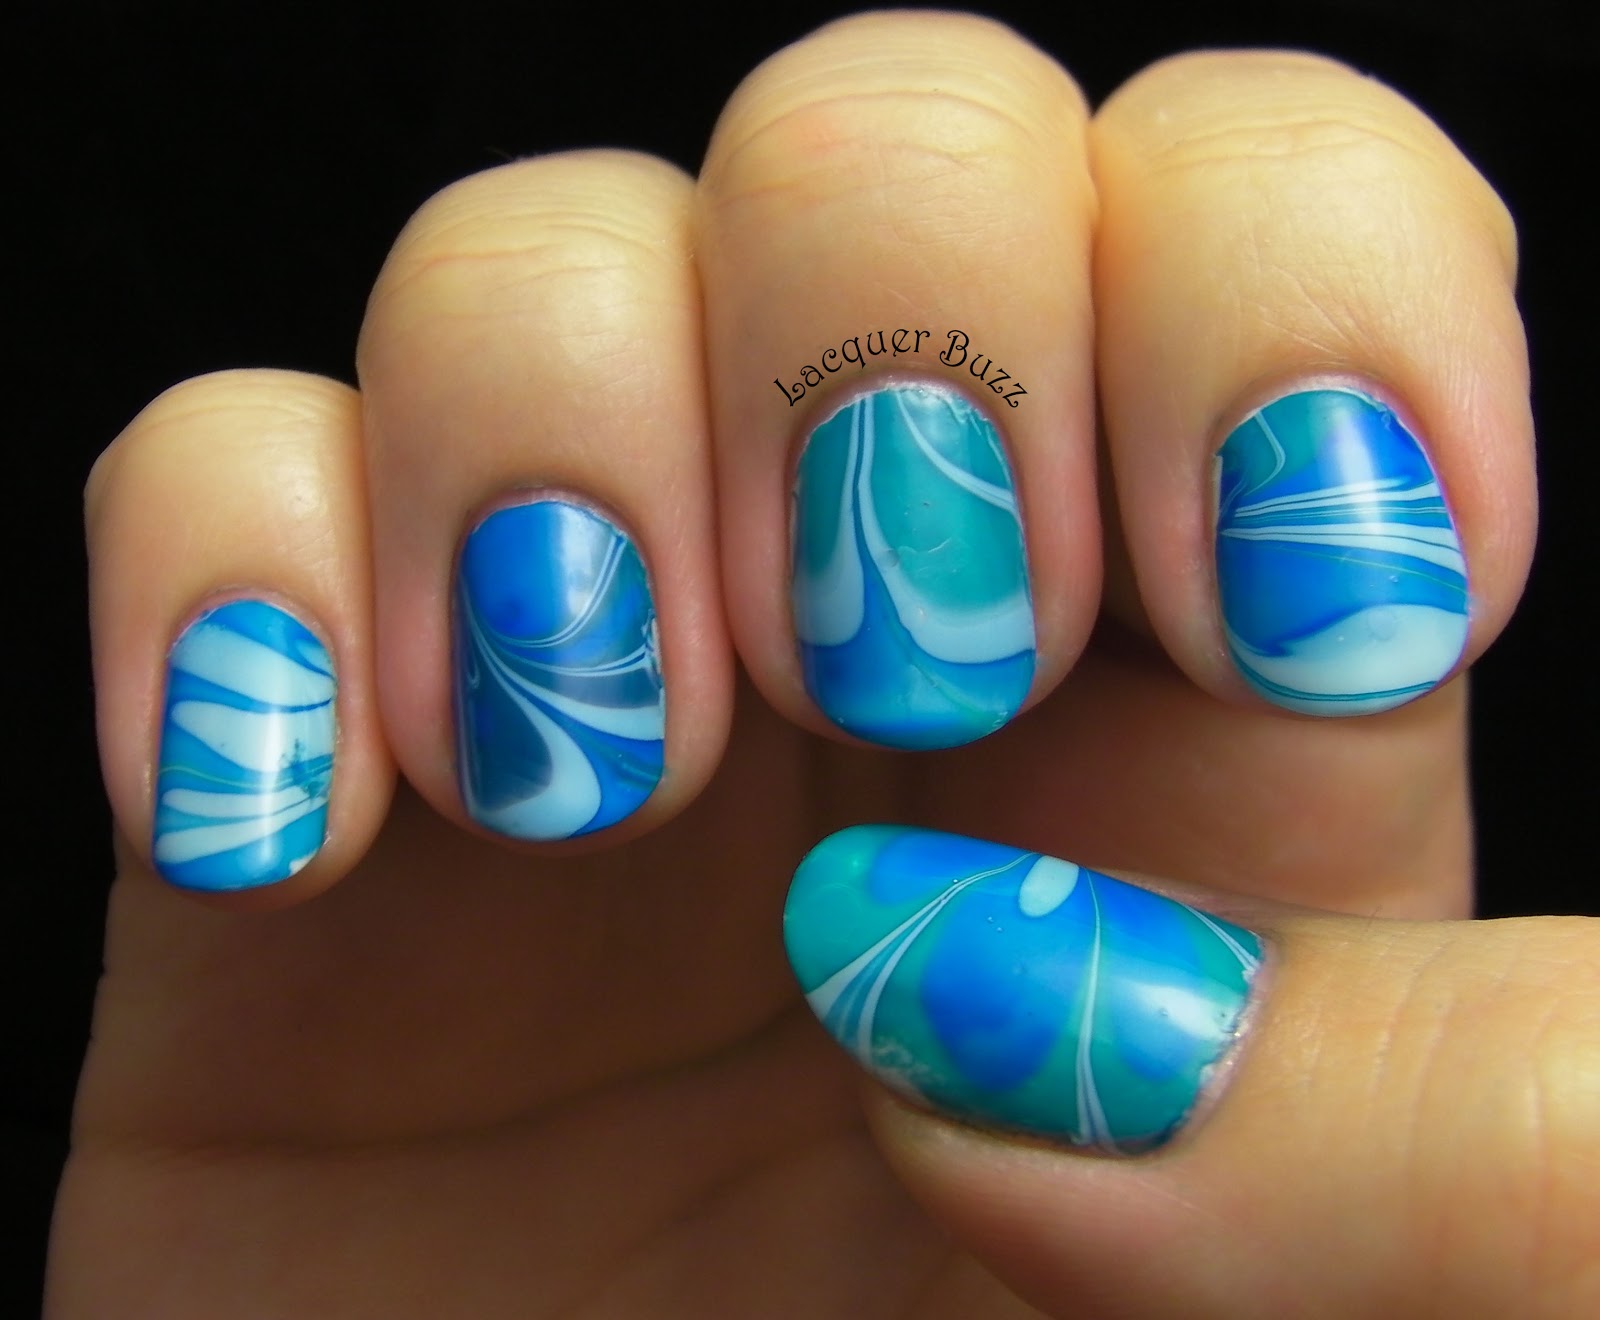 Lacquer Buzz: My first successful water marble